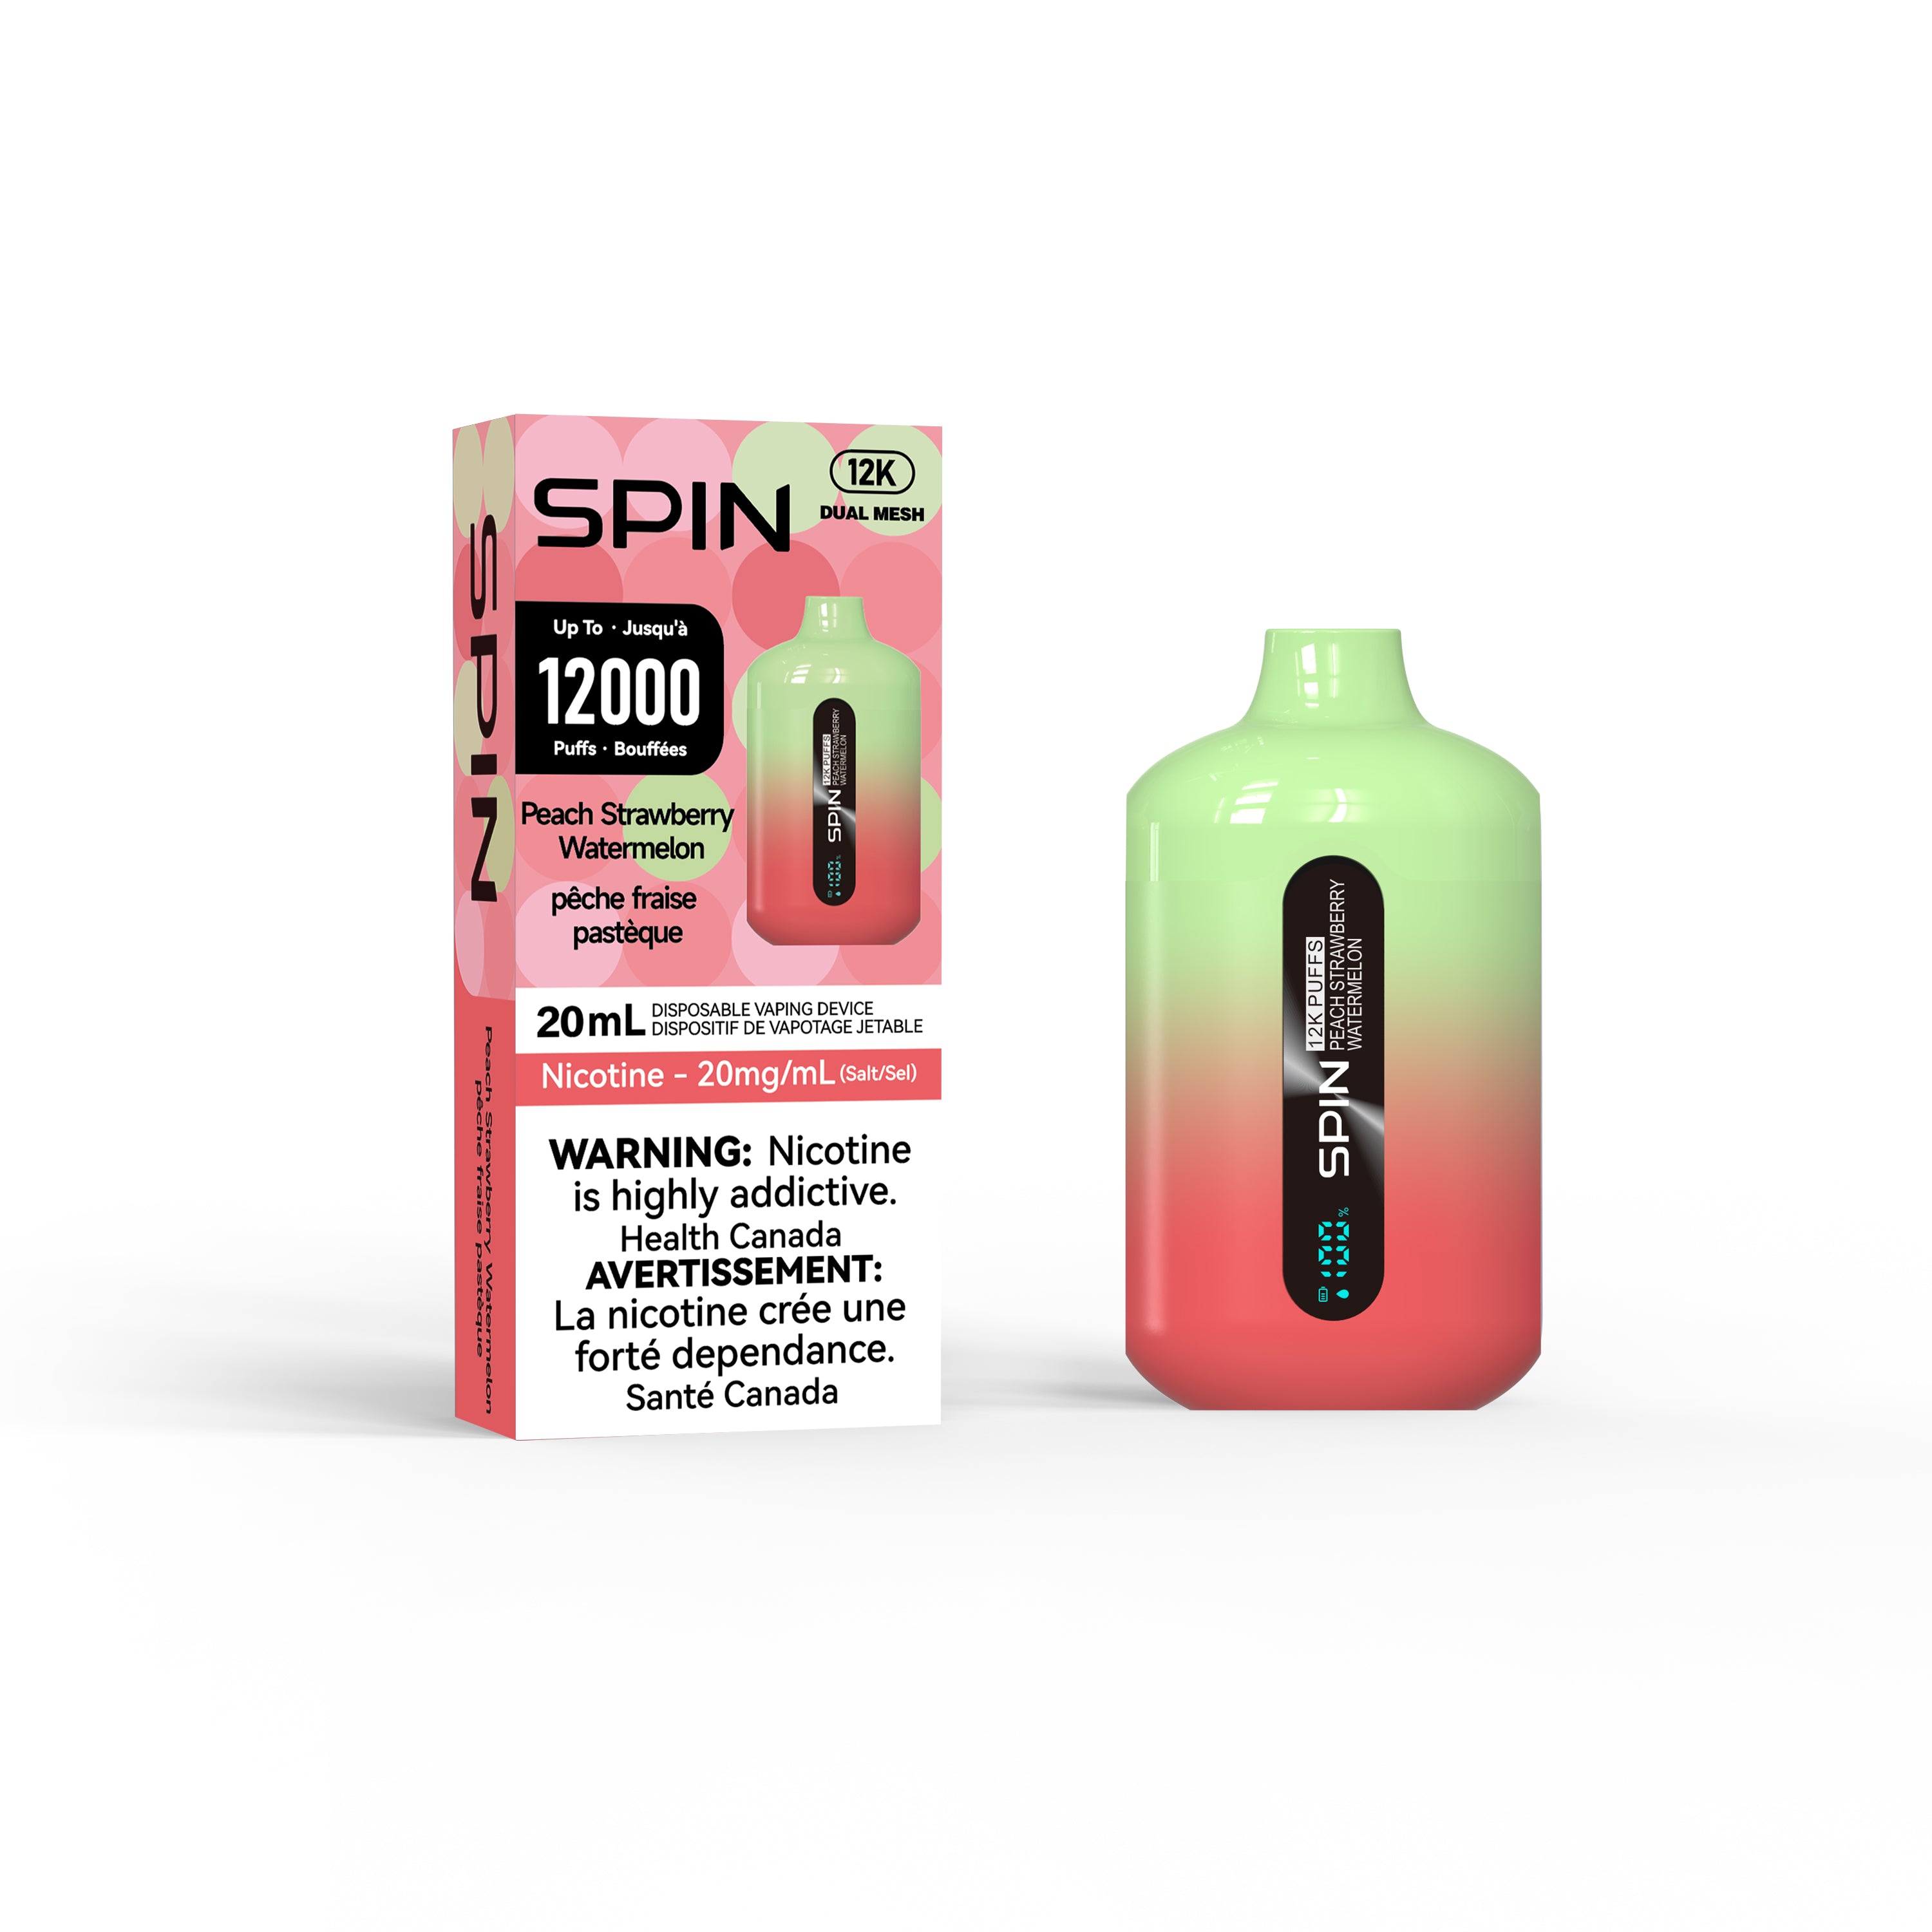 Spin 12K - Up to 12000 Puffs - Peach Strawberry Watermelon